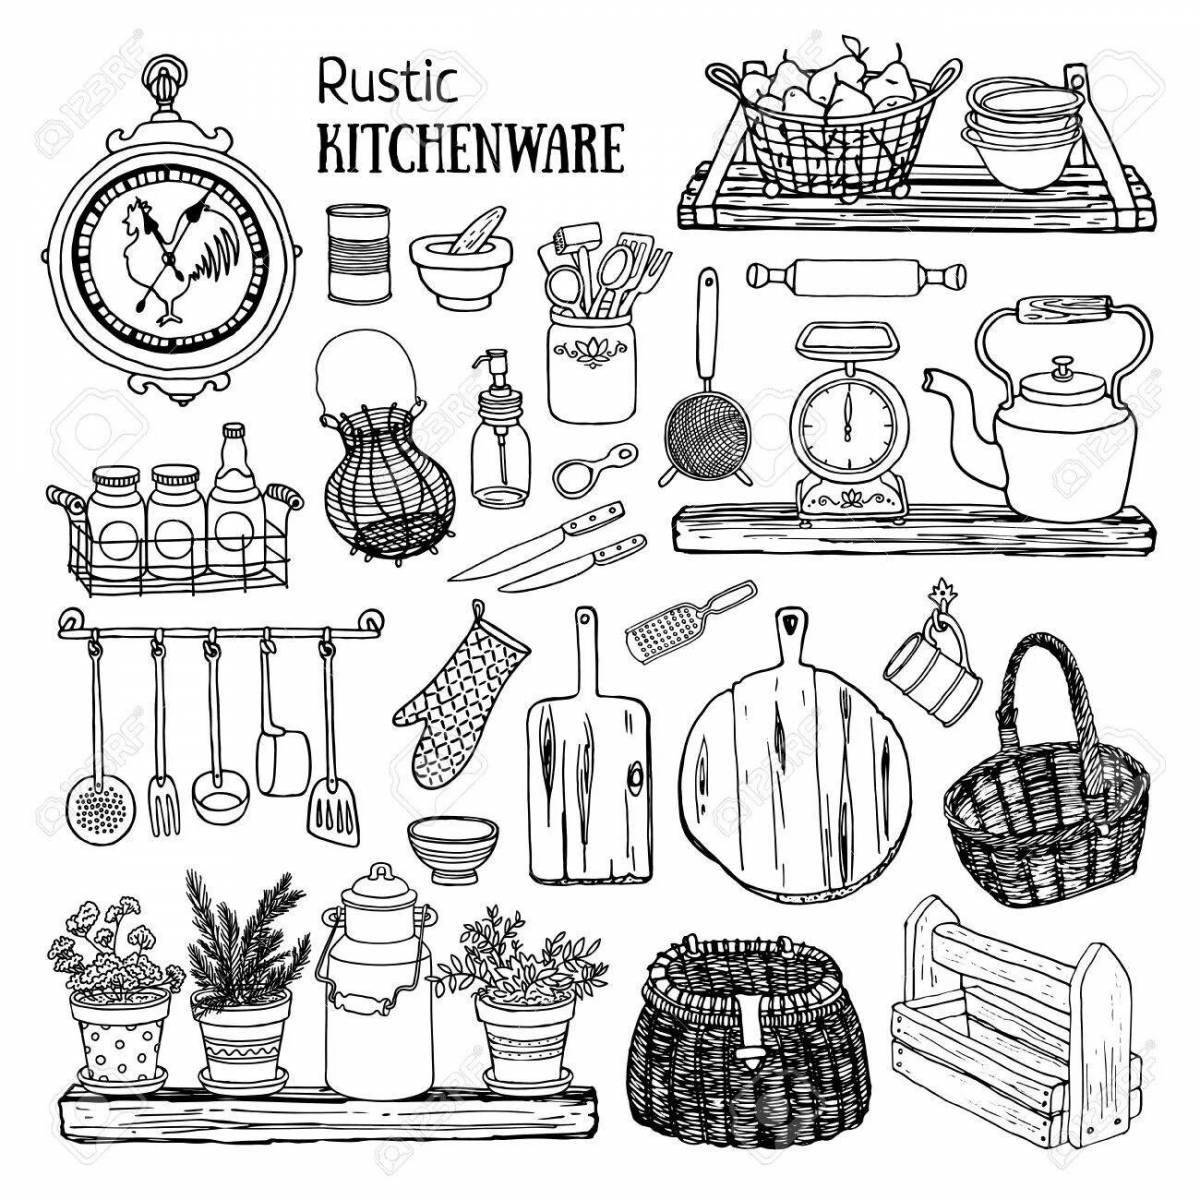 Fun coloring of kitchen utensils for kids